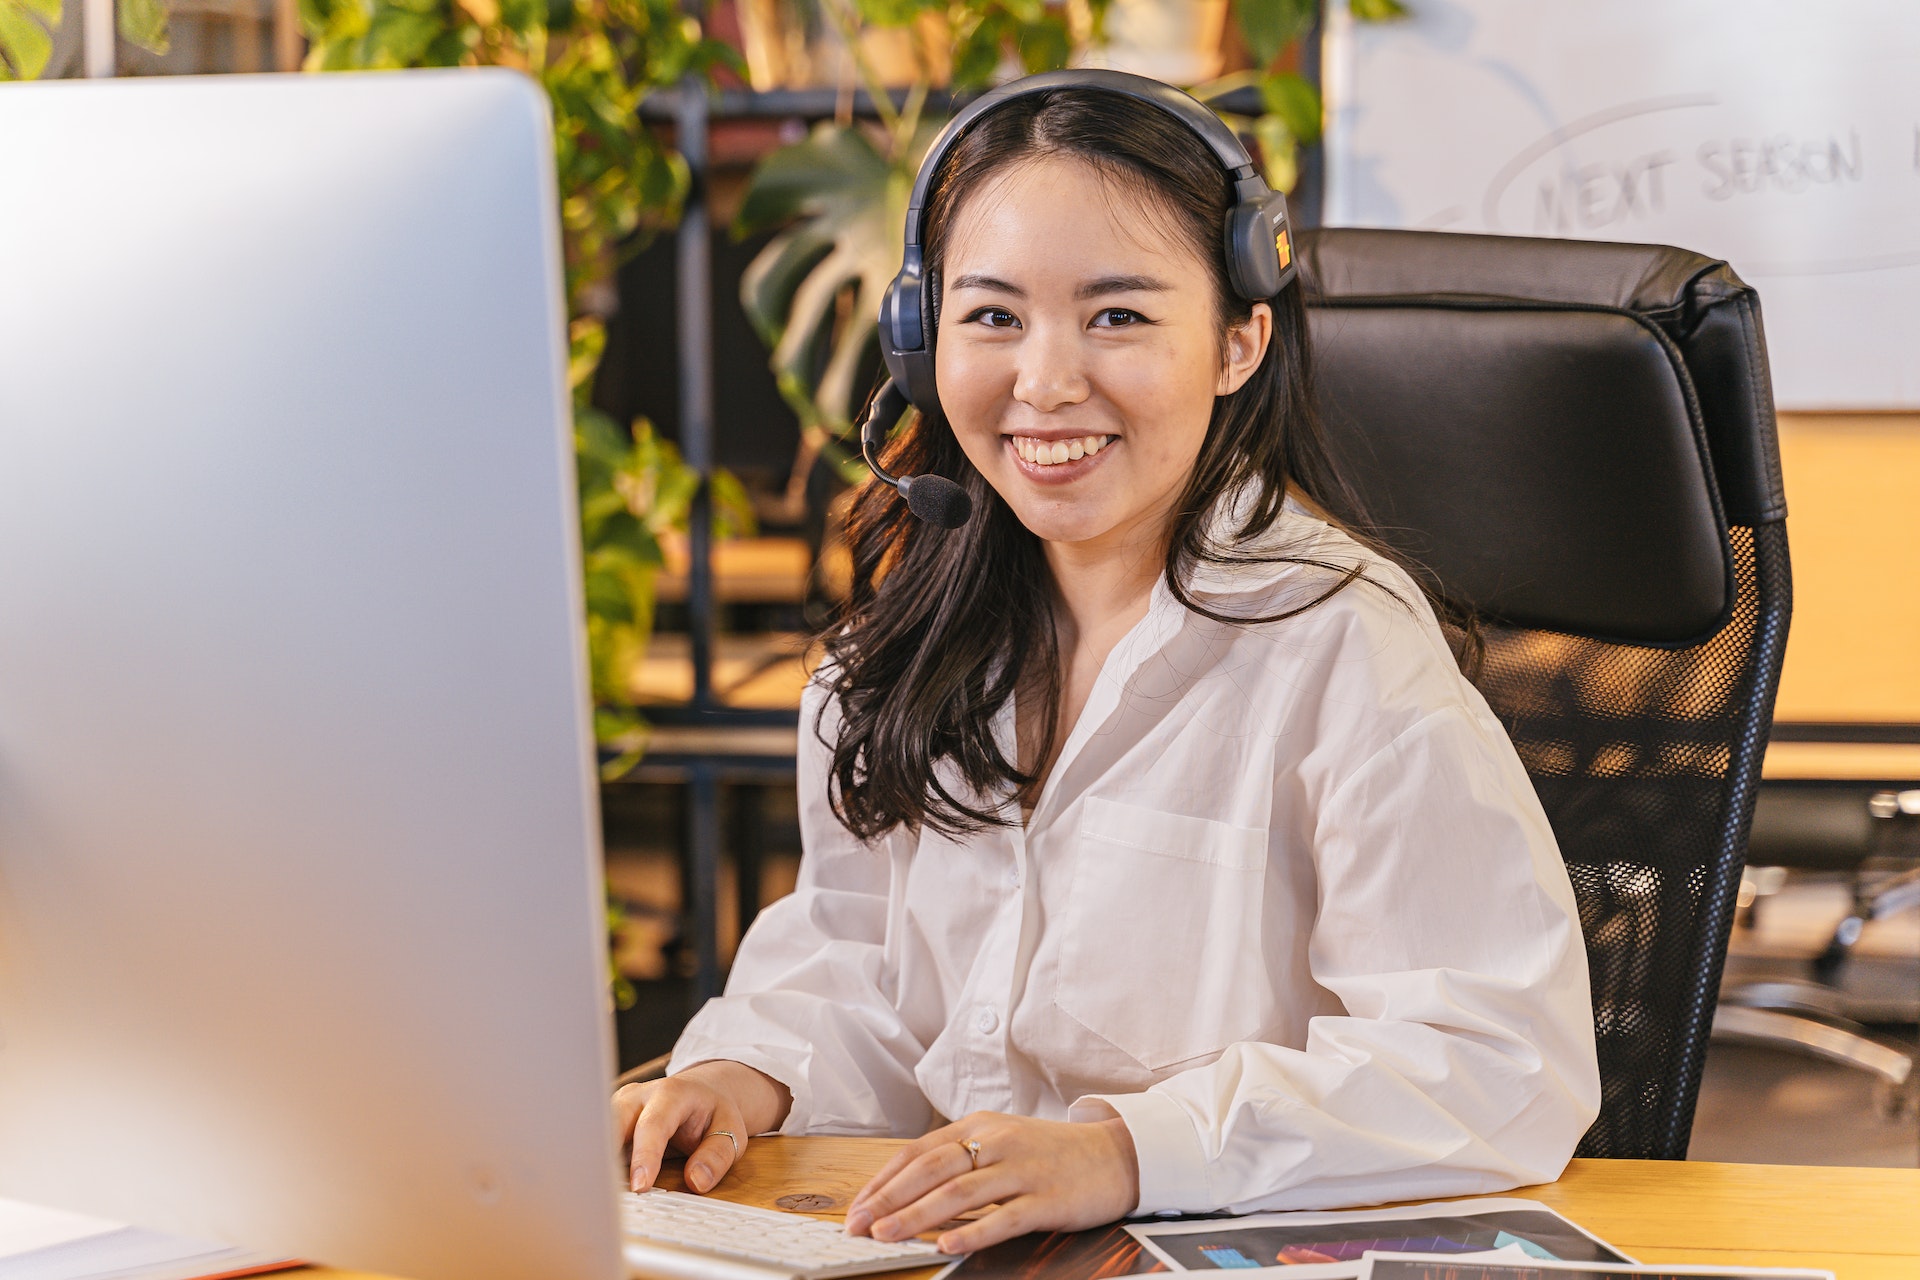 A smiling woman with a headset on sitting at a desk